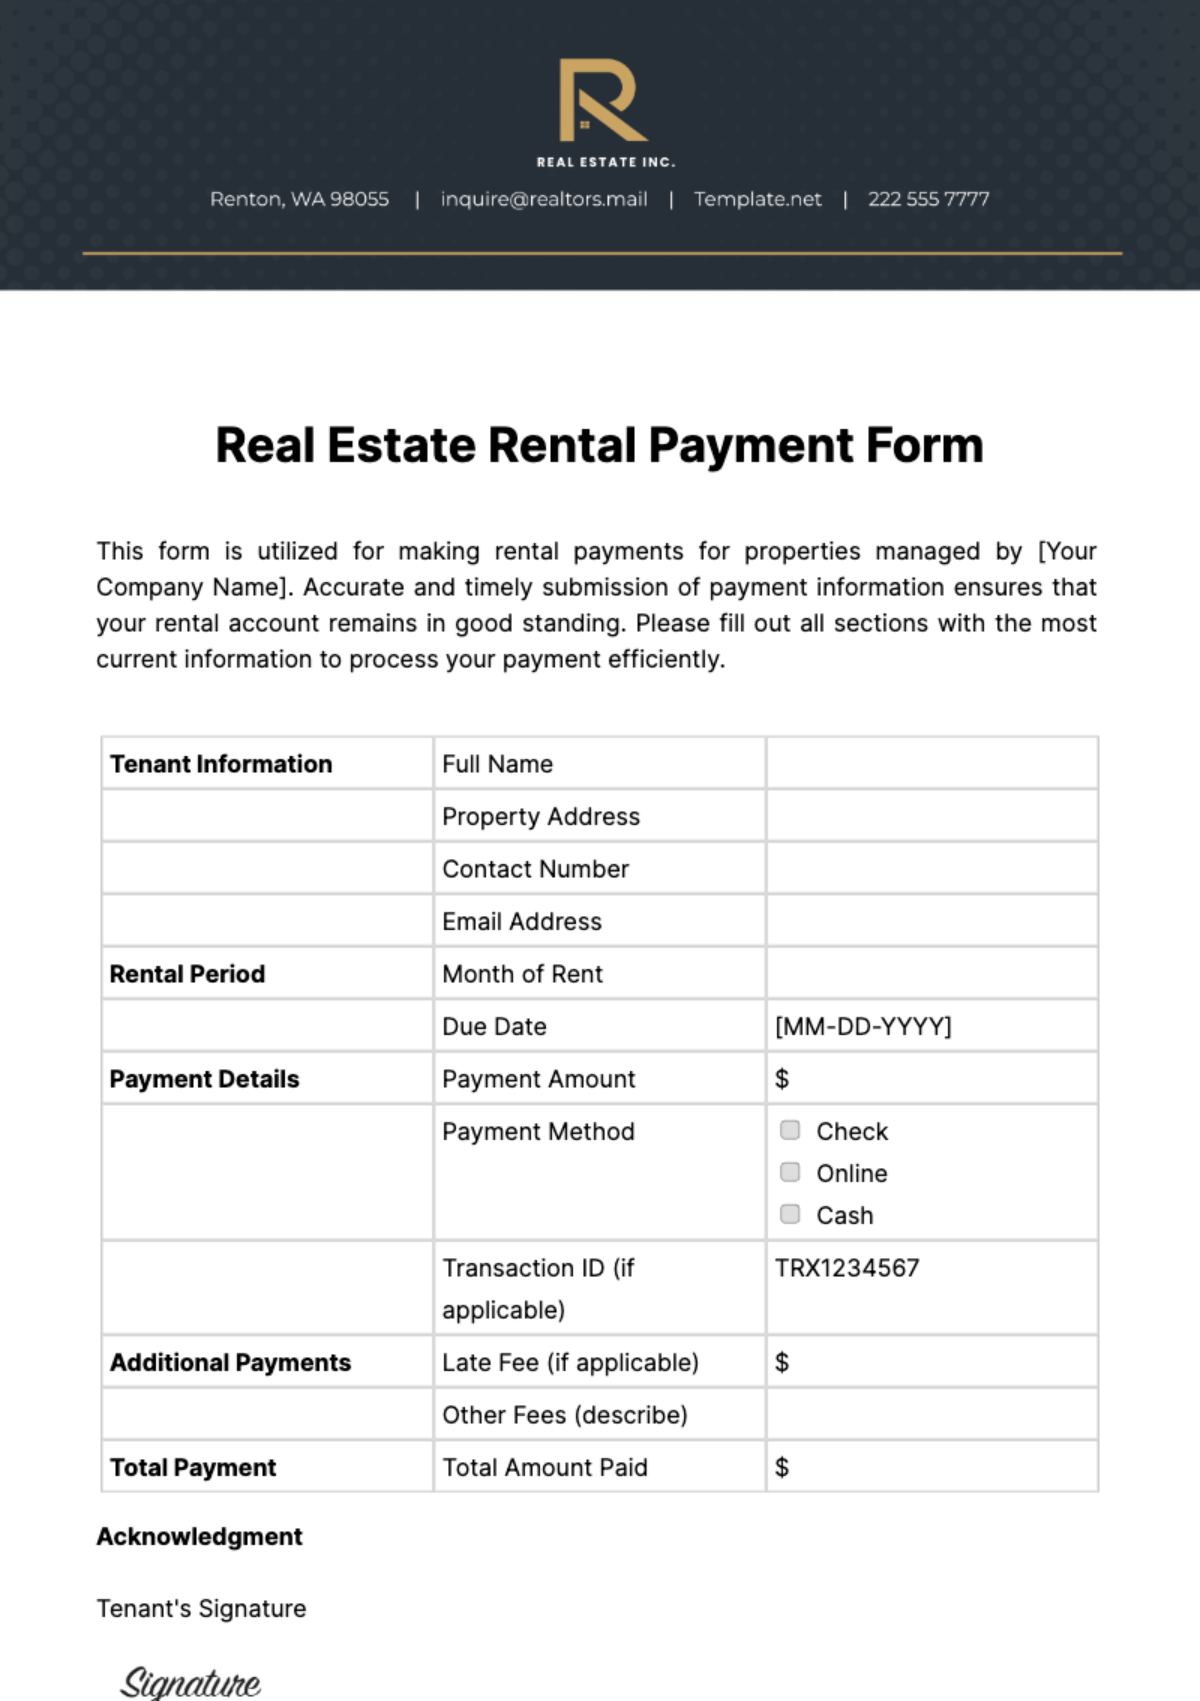 Real Estate Rental Payment Form Template